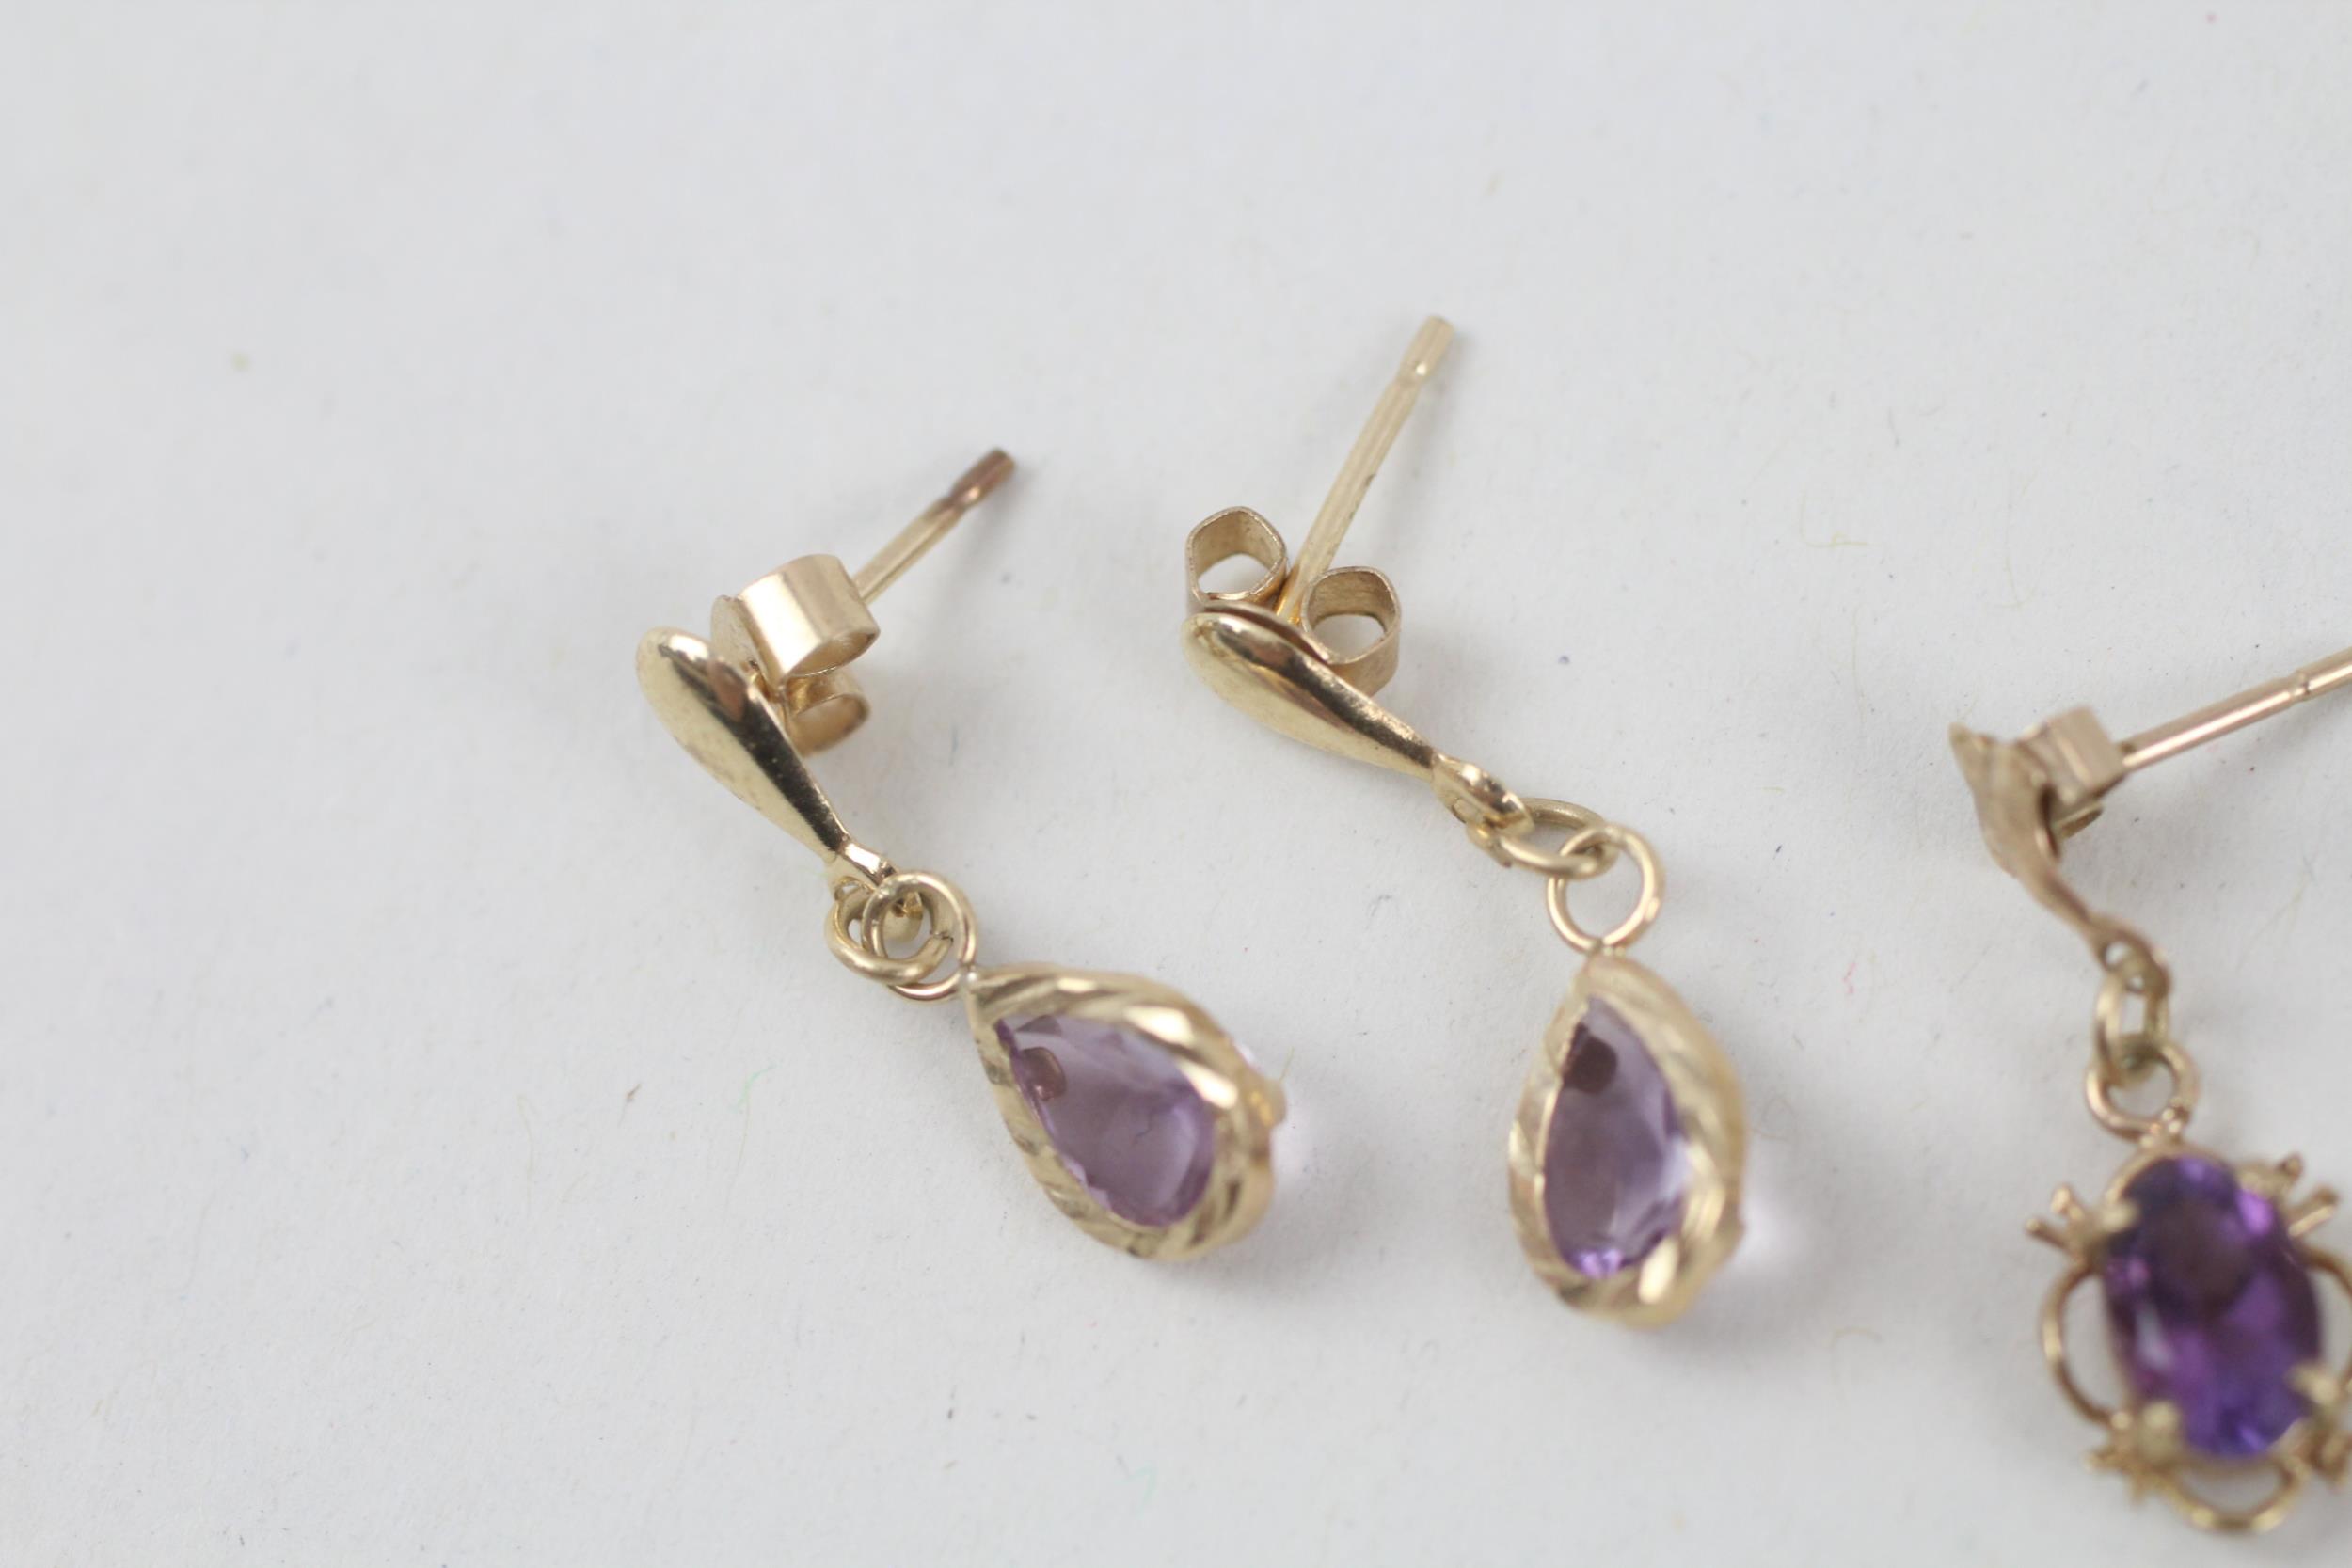 2x 9ct gold amethyst drop earrings with scroll backs - 1.5 g - Image 3 of 8